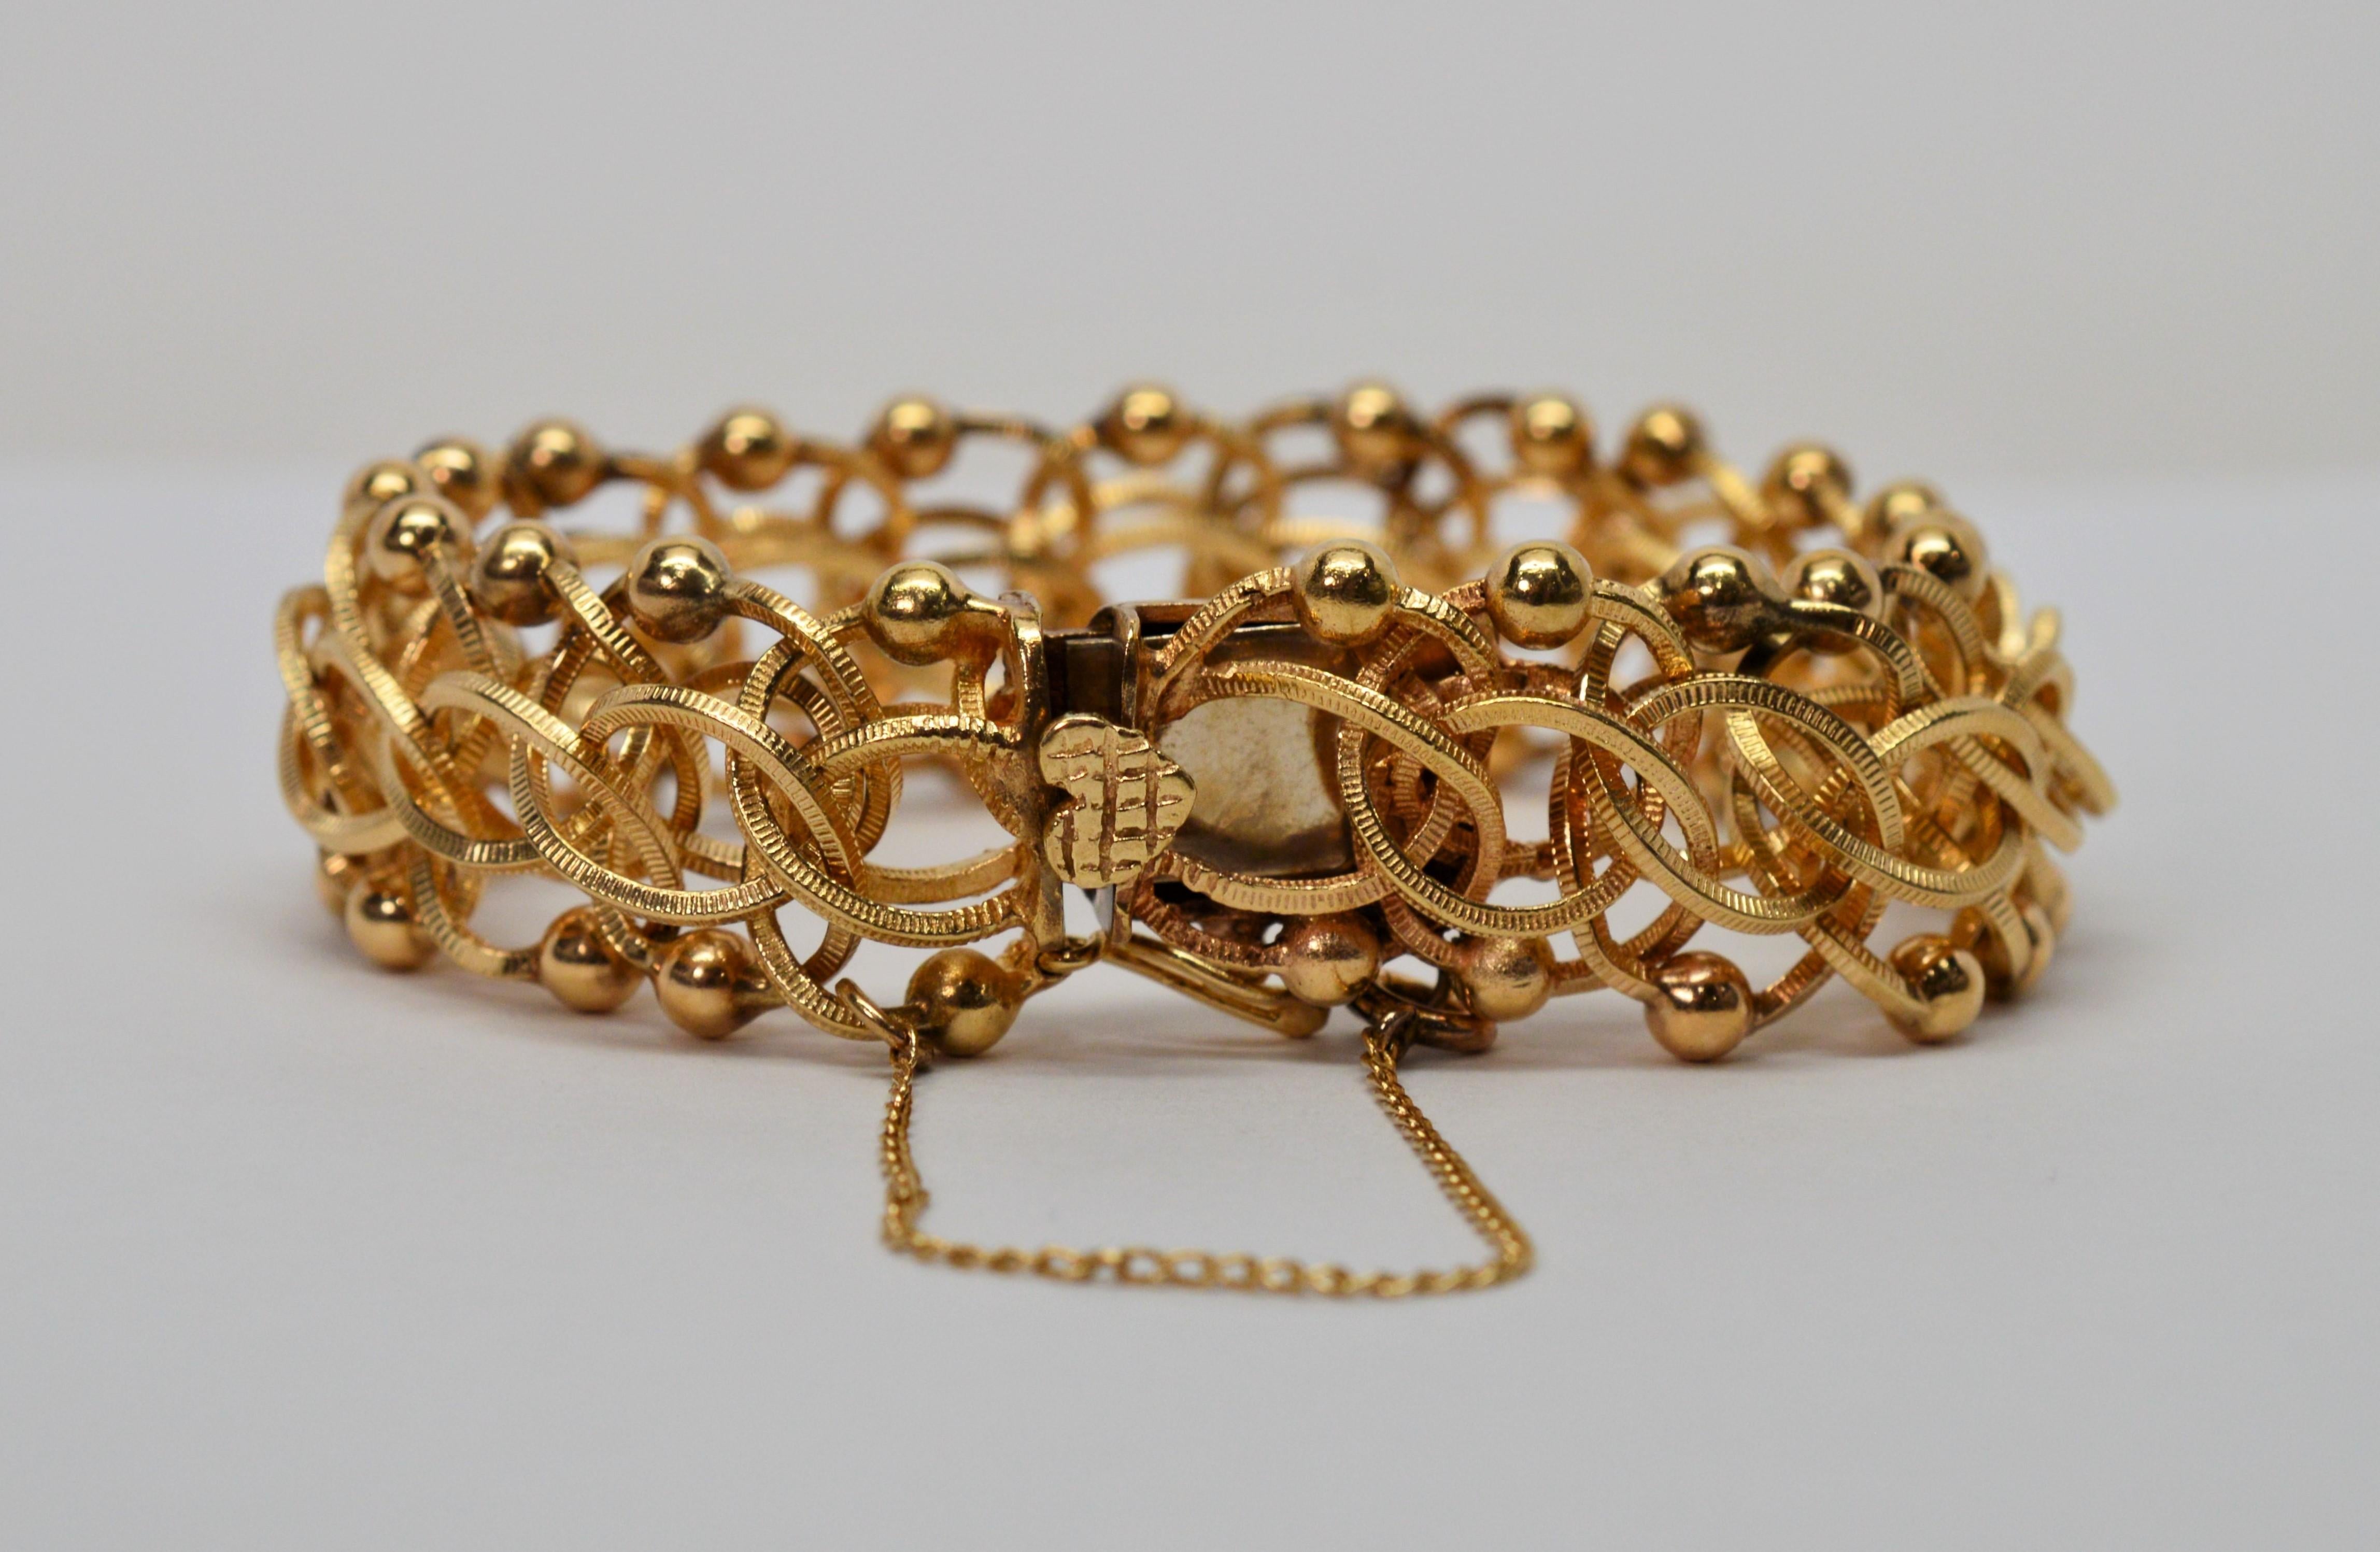 Stunning, with added attention to detail describes this 1950s bracelet with the use of texture on the interwoven multiple fourteen carat yellow gold links that create a very attractive chain pattern.  Further highlighting the intricacy of the design